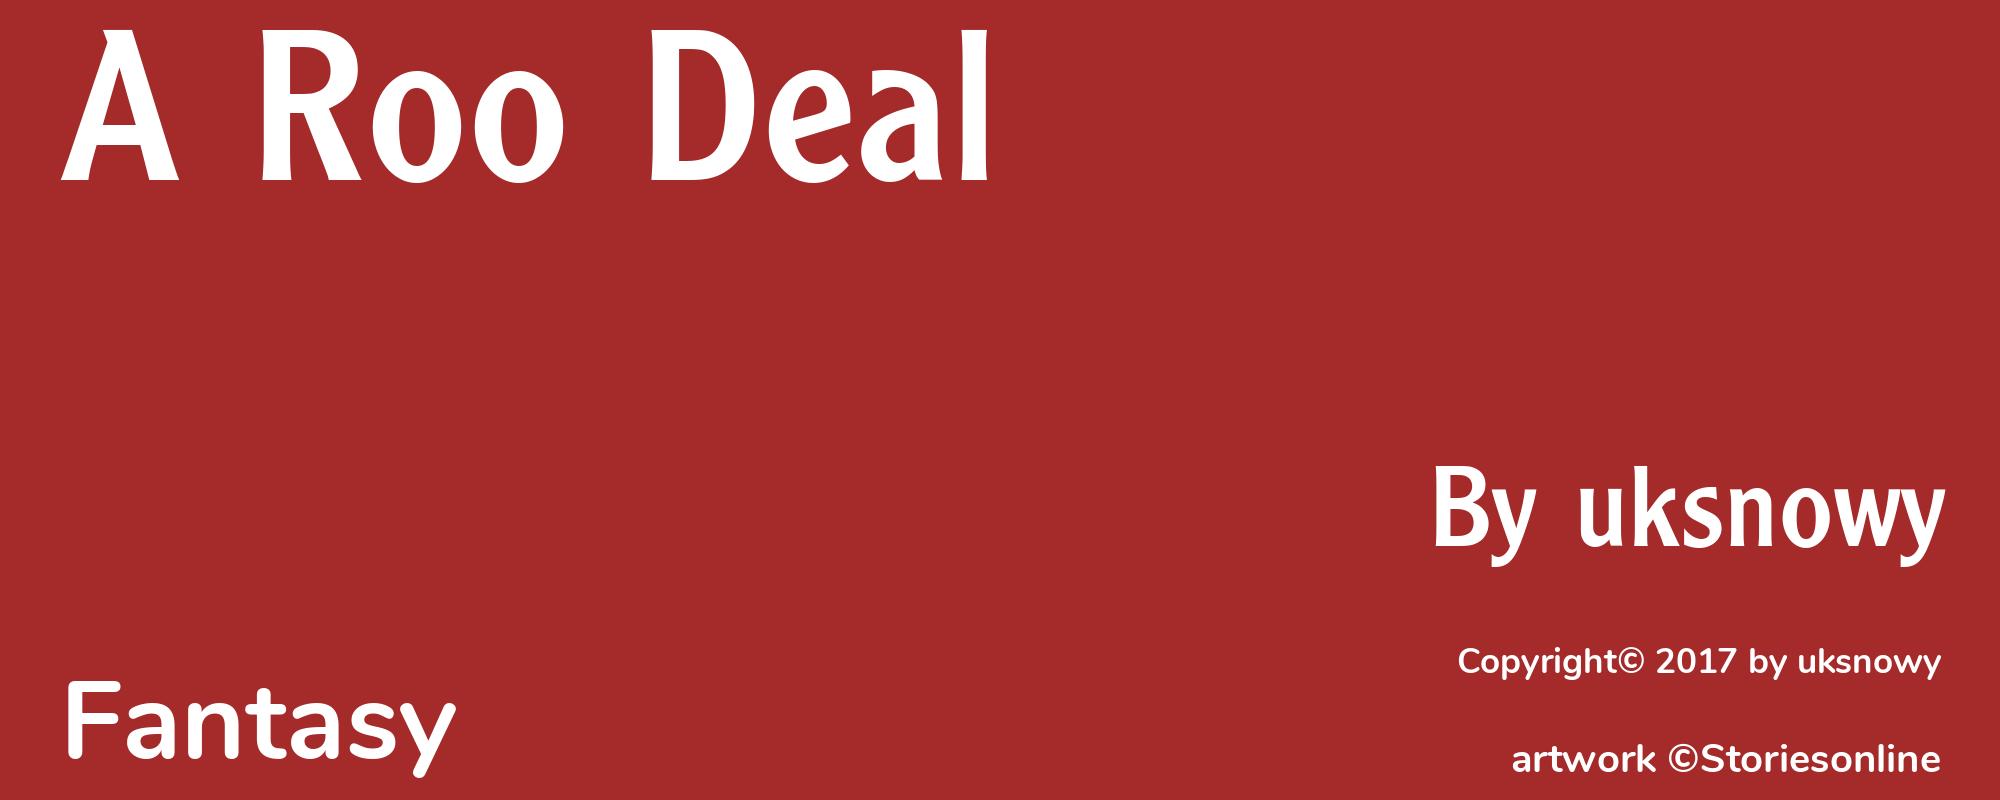 A Roo Deal - Cover